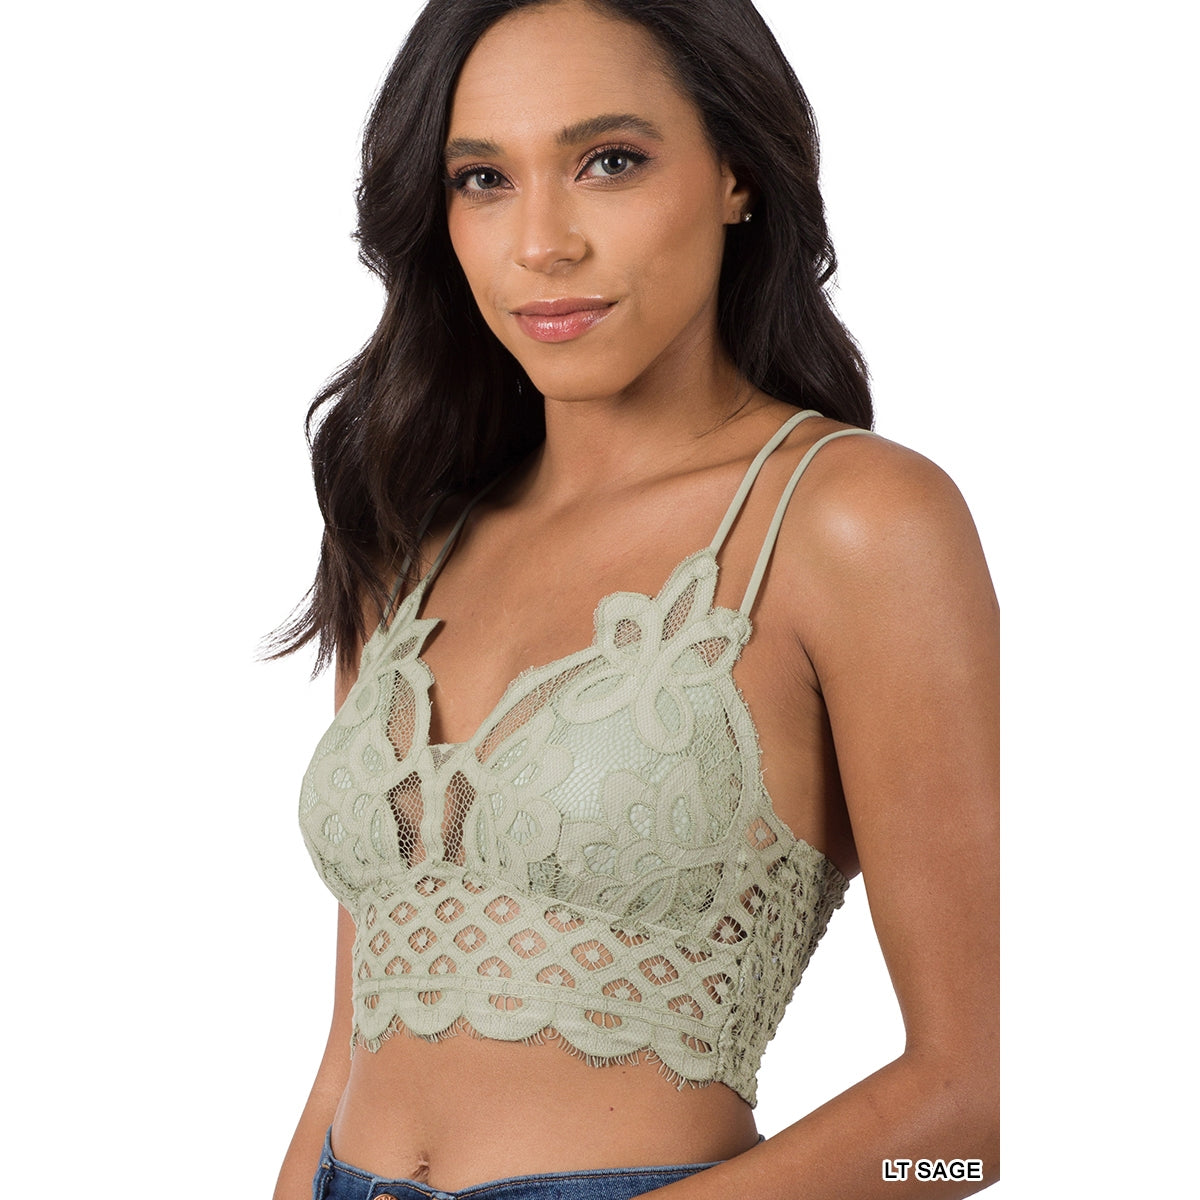 Lace bralette, REBELRY BOUTIQUE, Arvada, CO